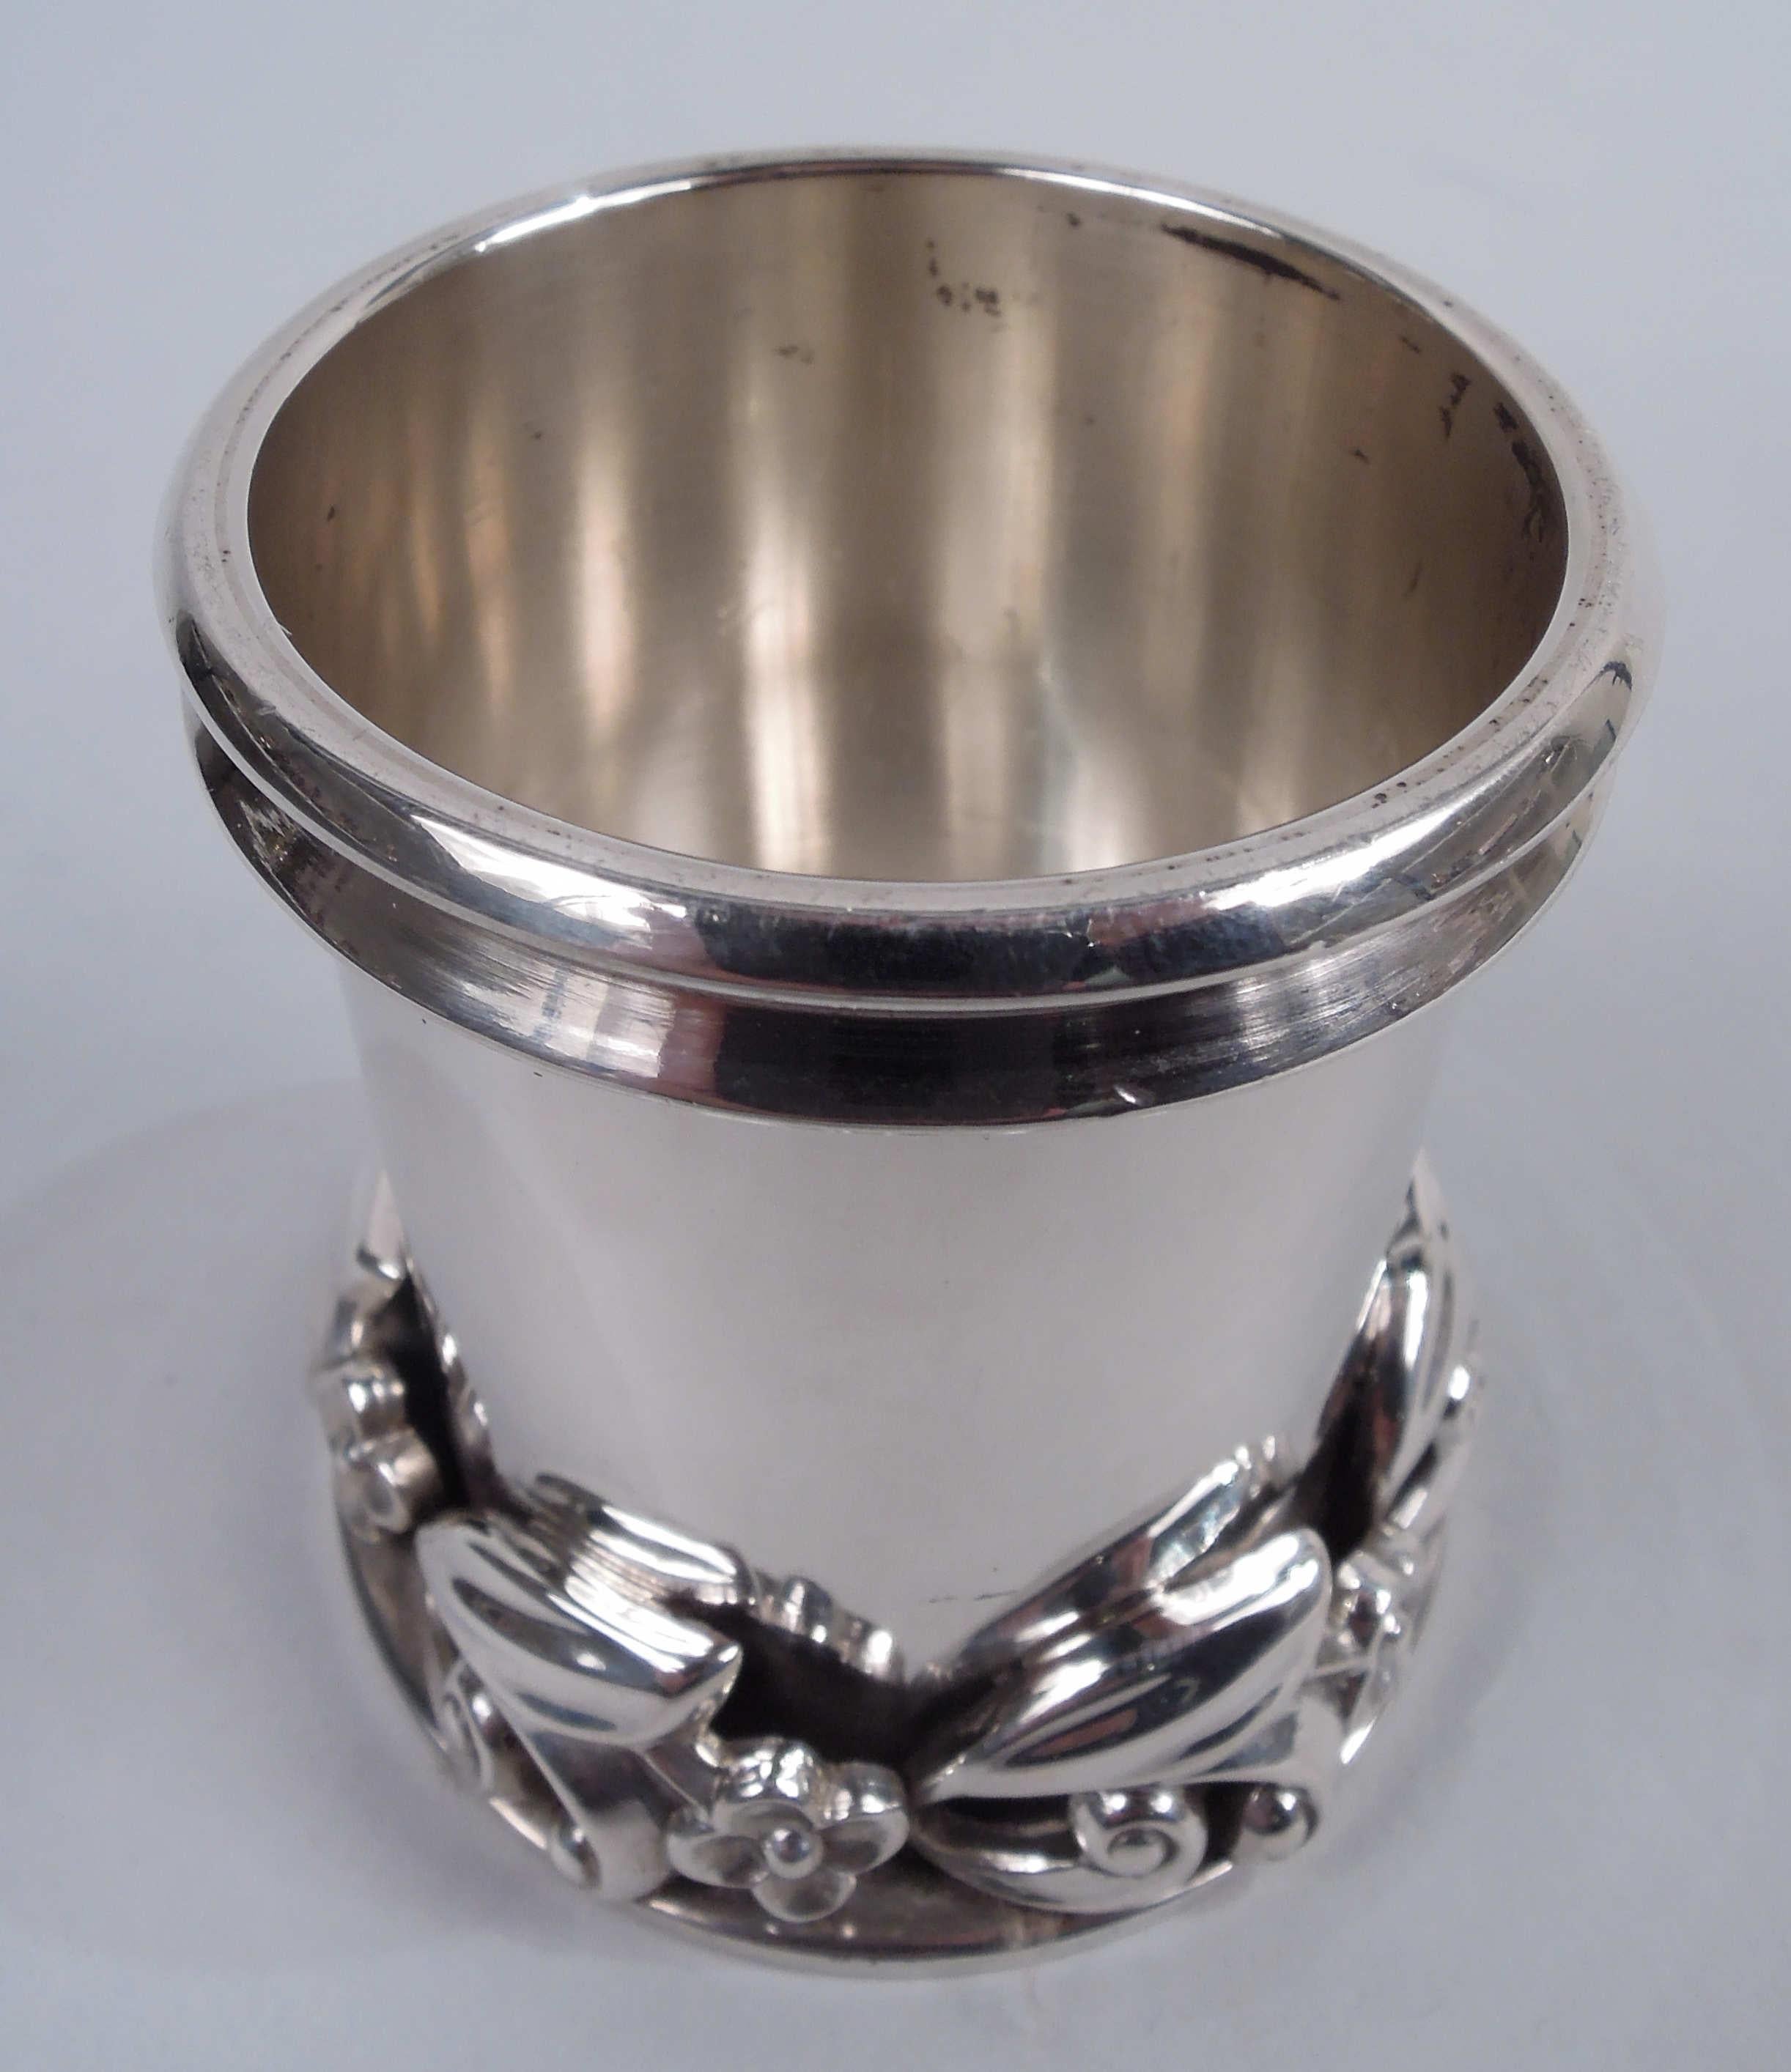 Midcentury Modern sterling silver toothpick holder. Made by Alphonse La Paglia (d. 1953) in New Jersey. Drum-form with double-banded mouth rim. Spread base applied with cast band comprising alternating leafing scrolls and flowerheads. Fully marked